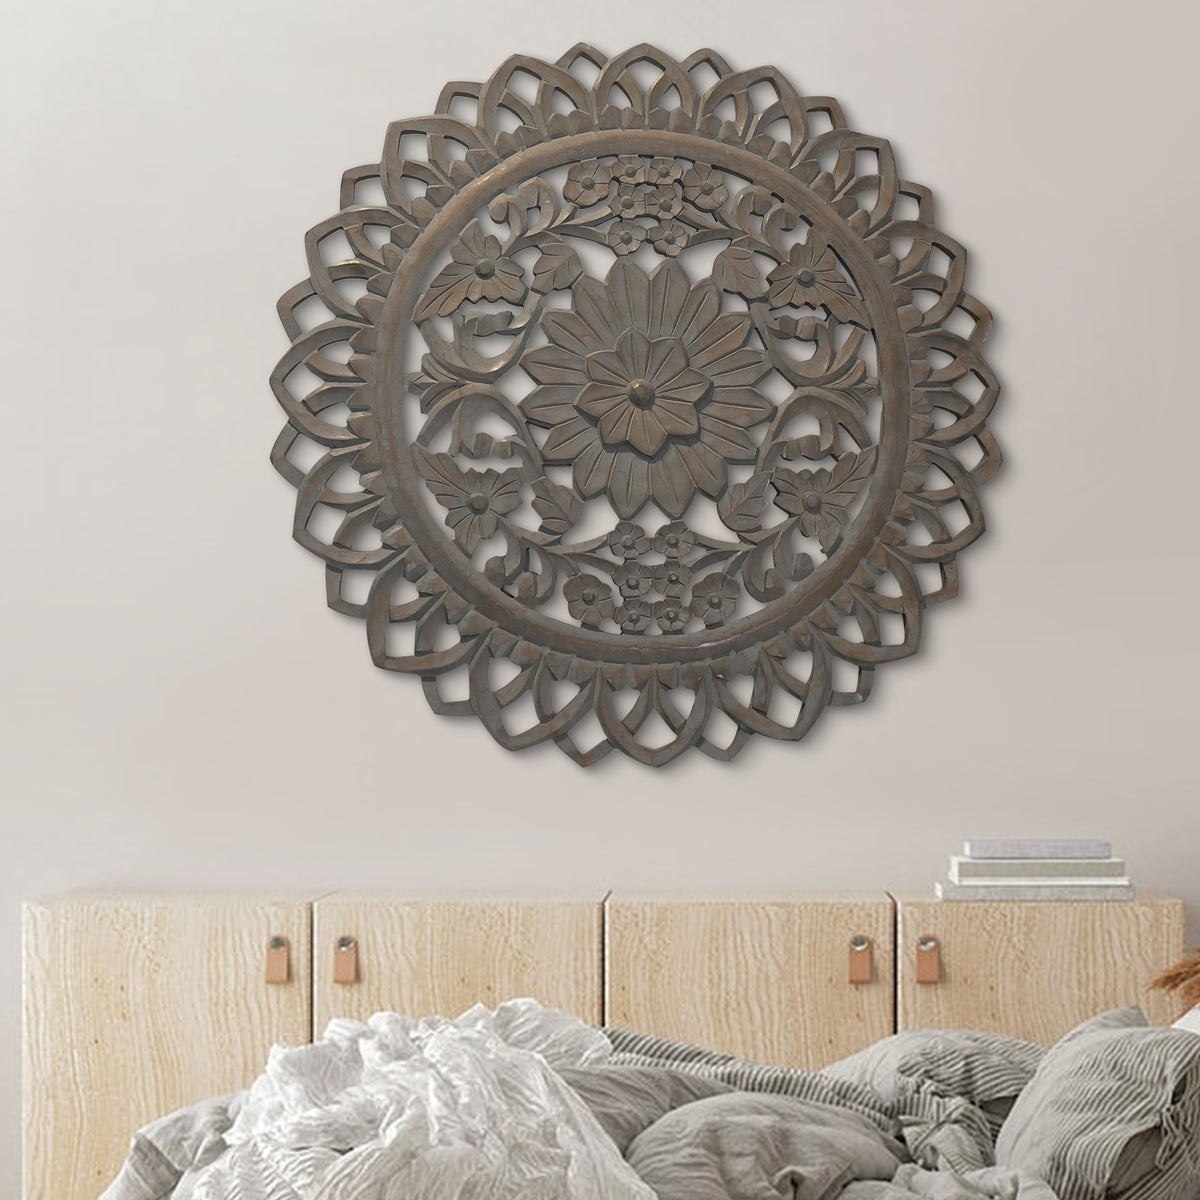 Handcarved Wooden Round Wall Art With Floral Carving, Distressed Brown